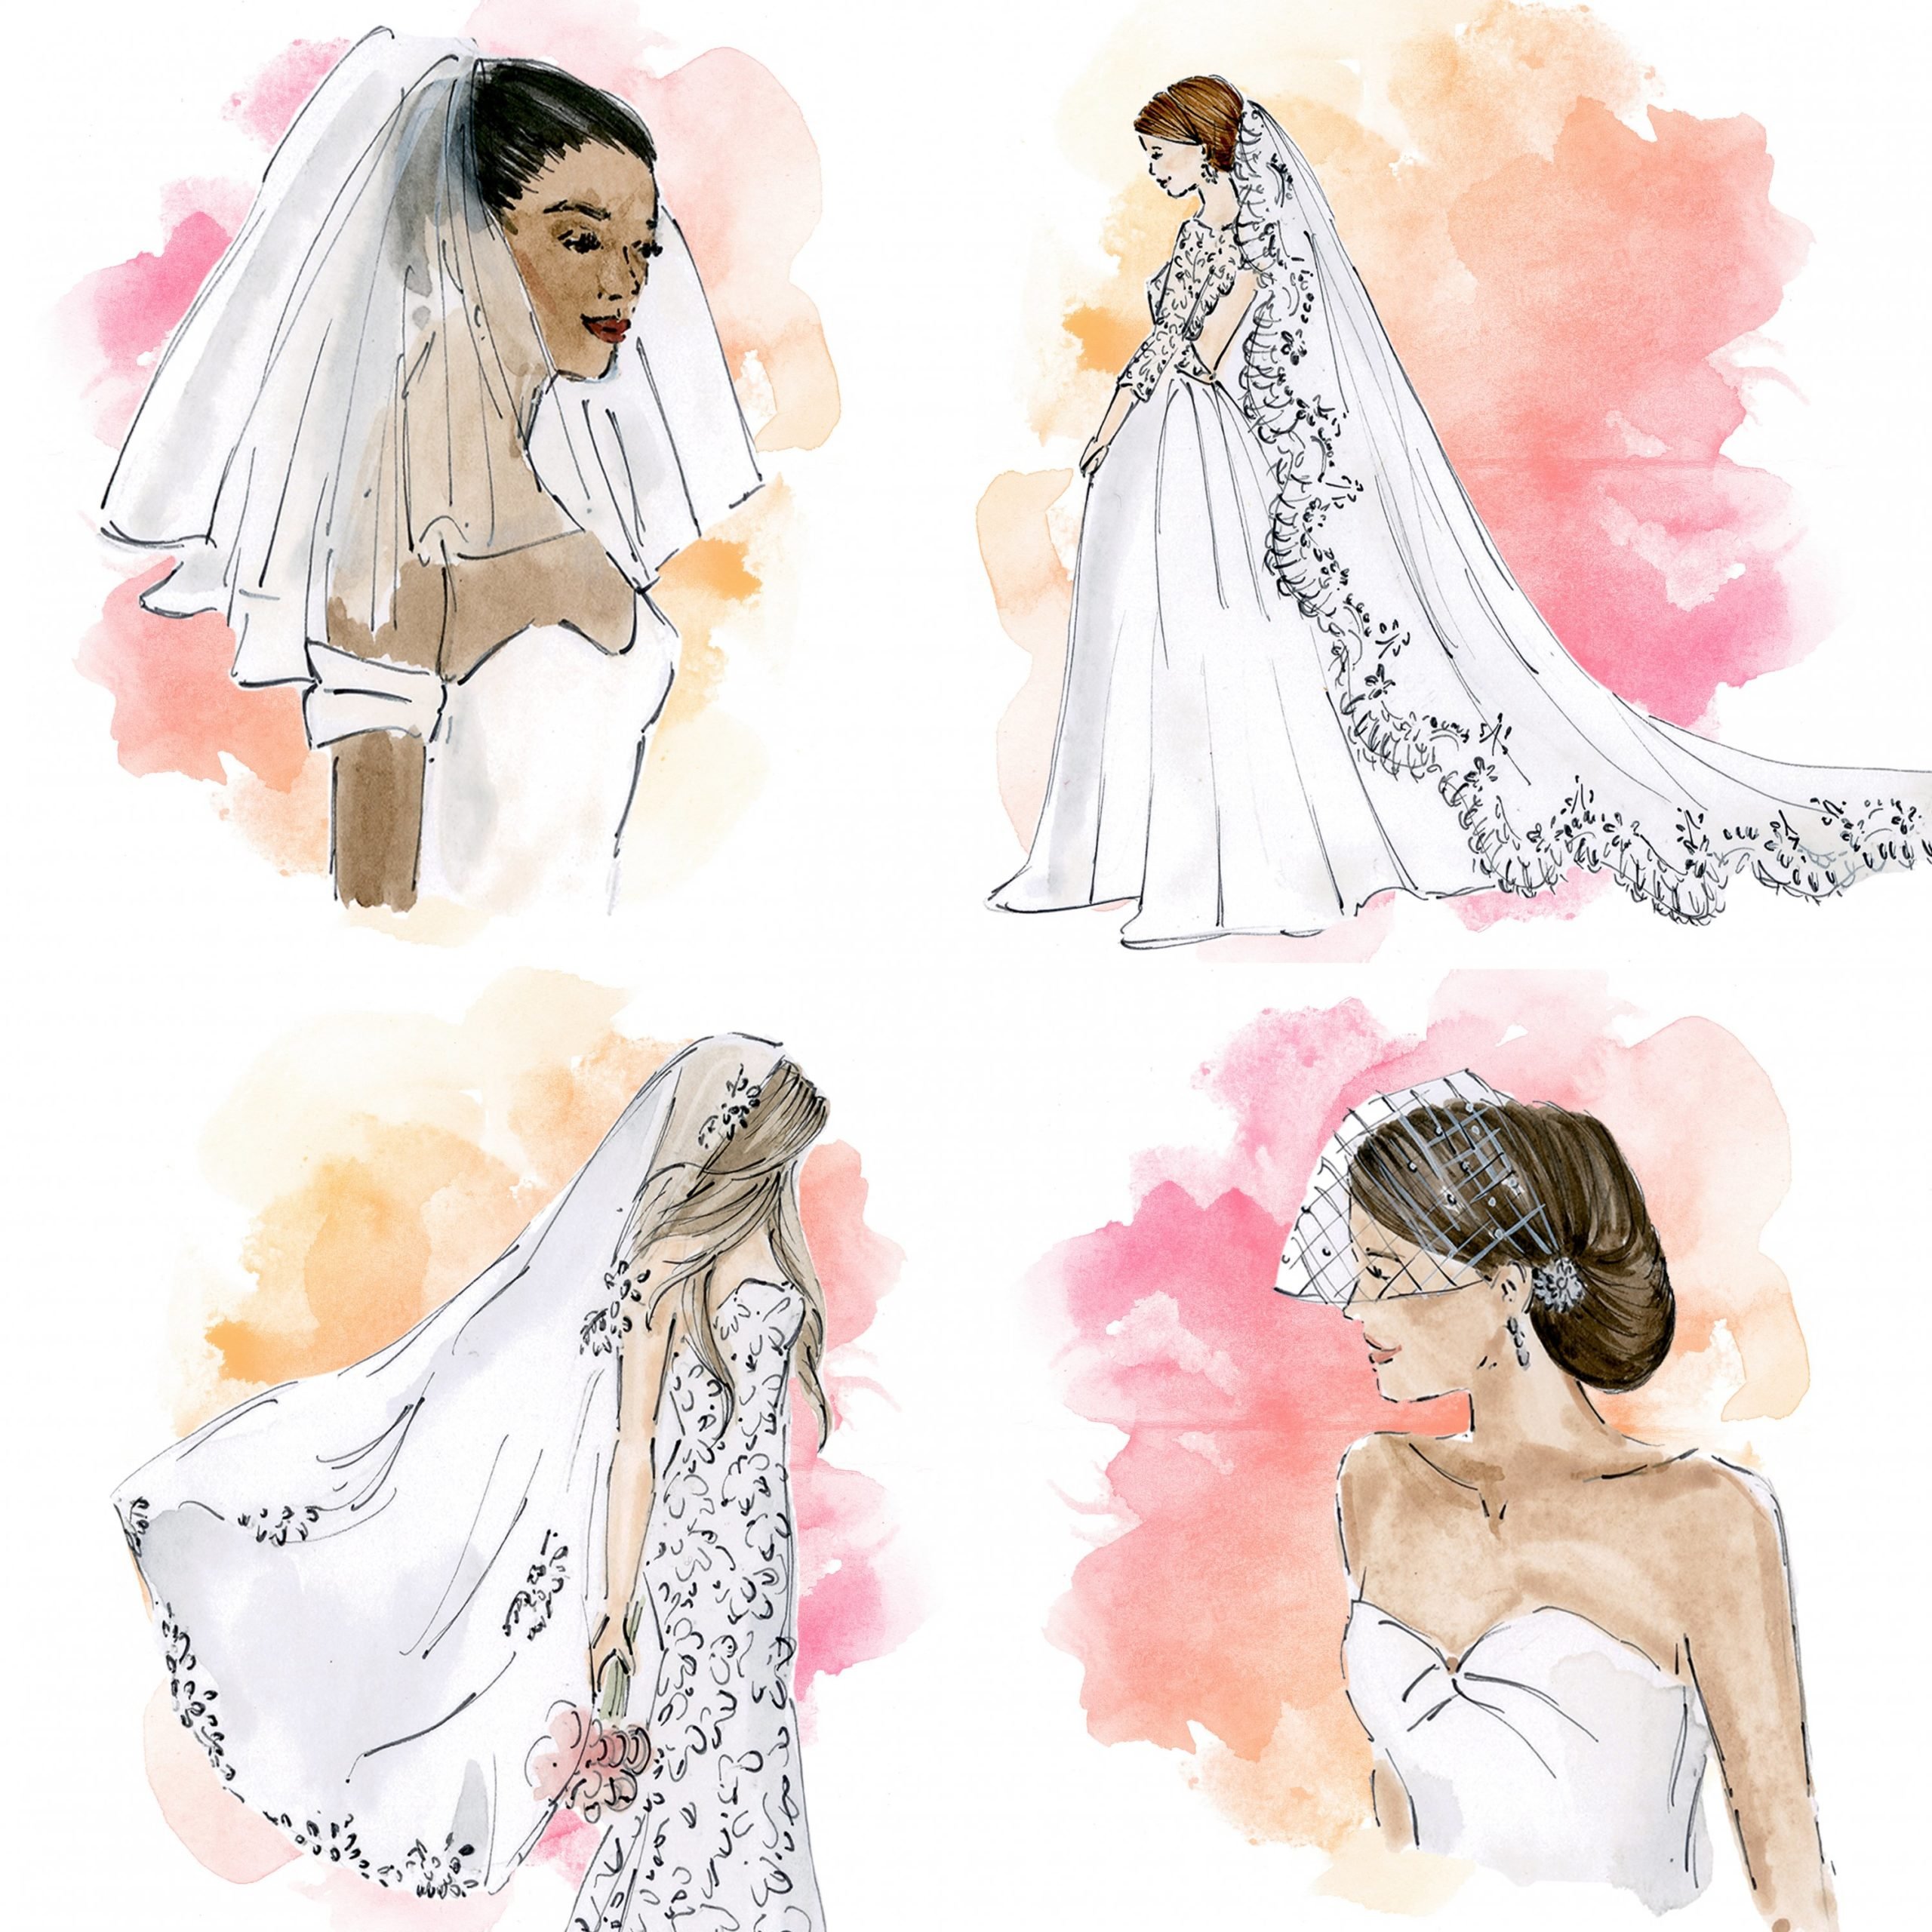 Wedding Veils: The Different Types & Expert Tips -  